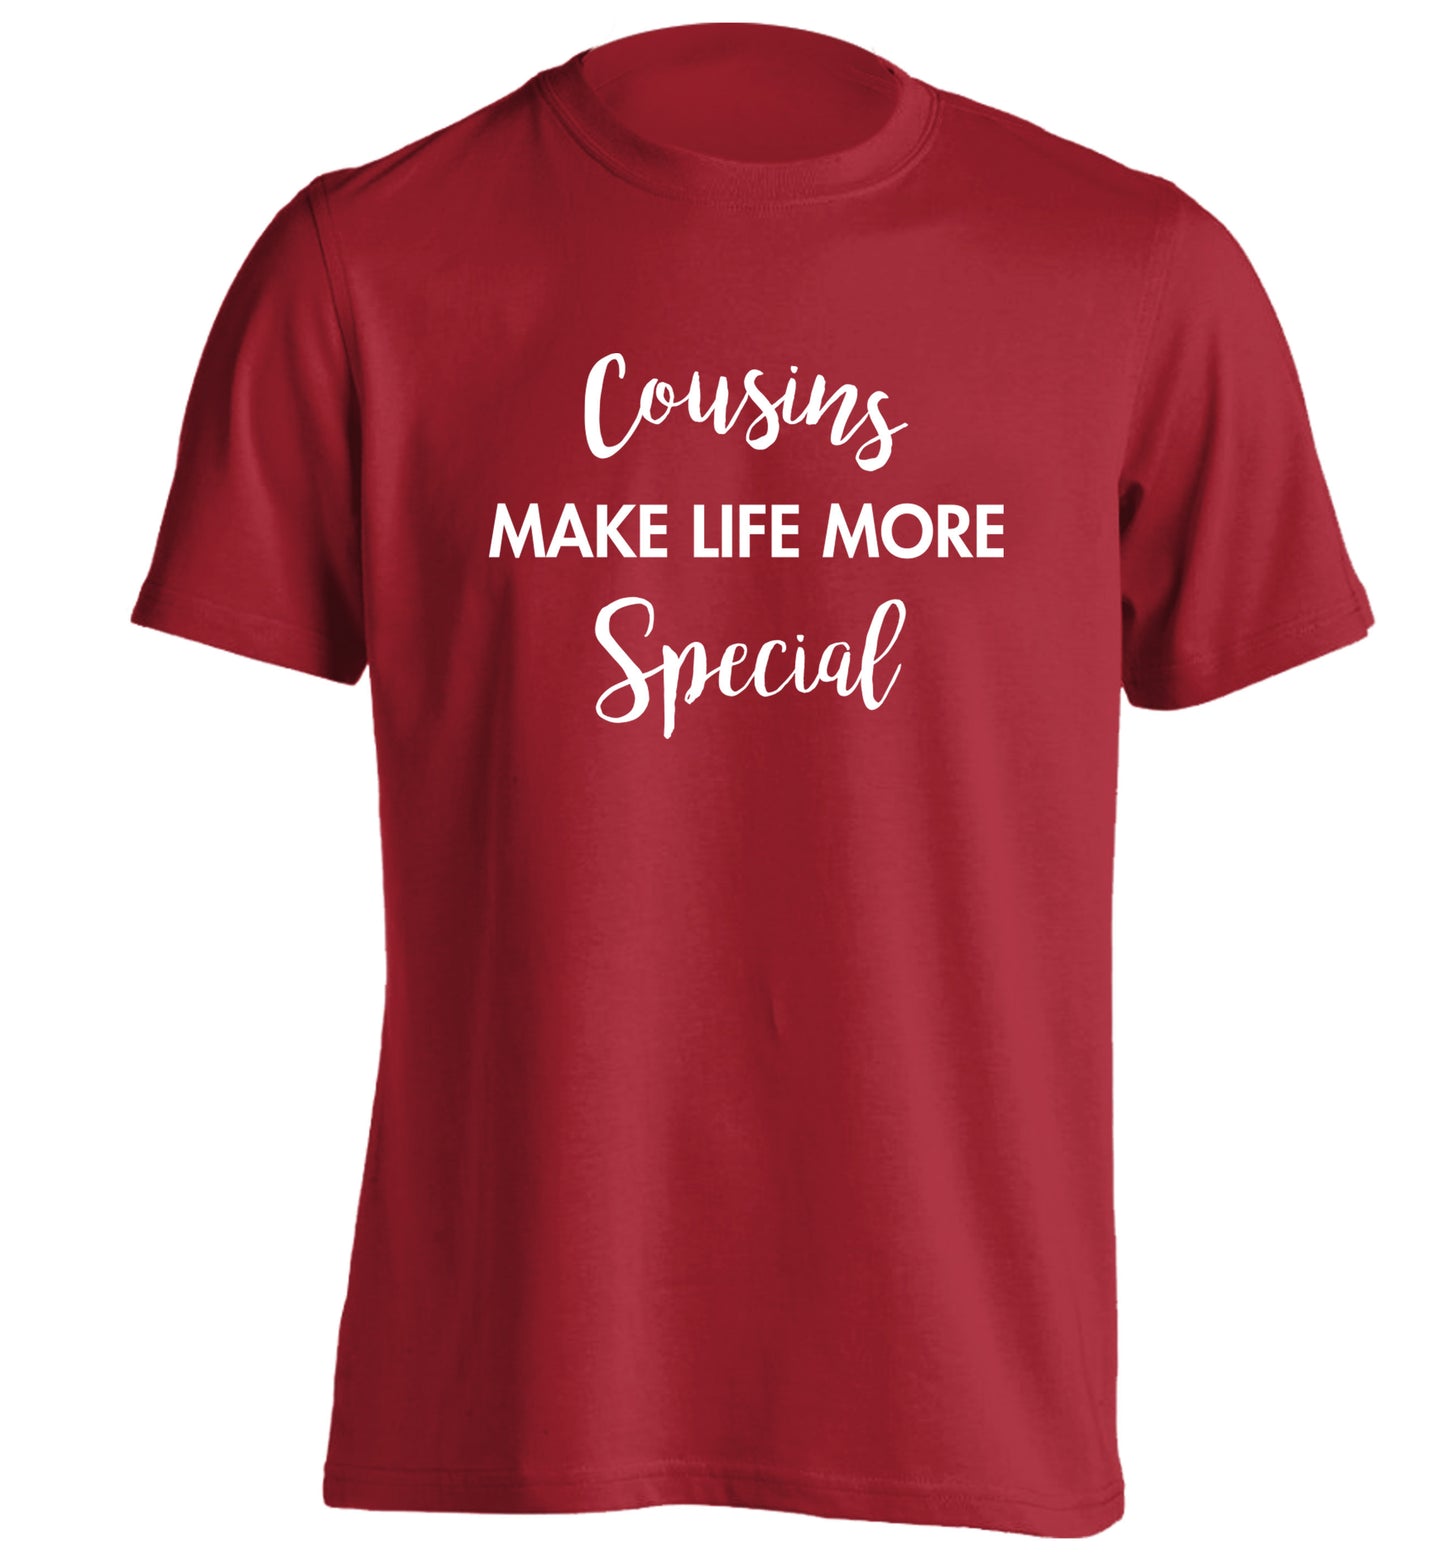 Cousins make life more special adults unisex red Tshirt 2XL